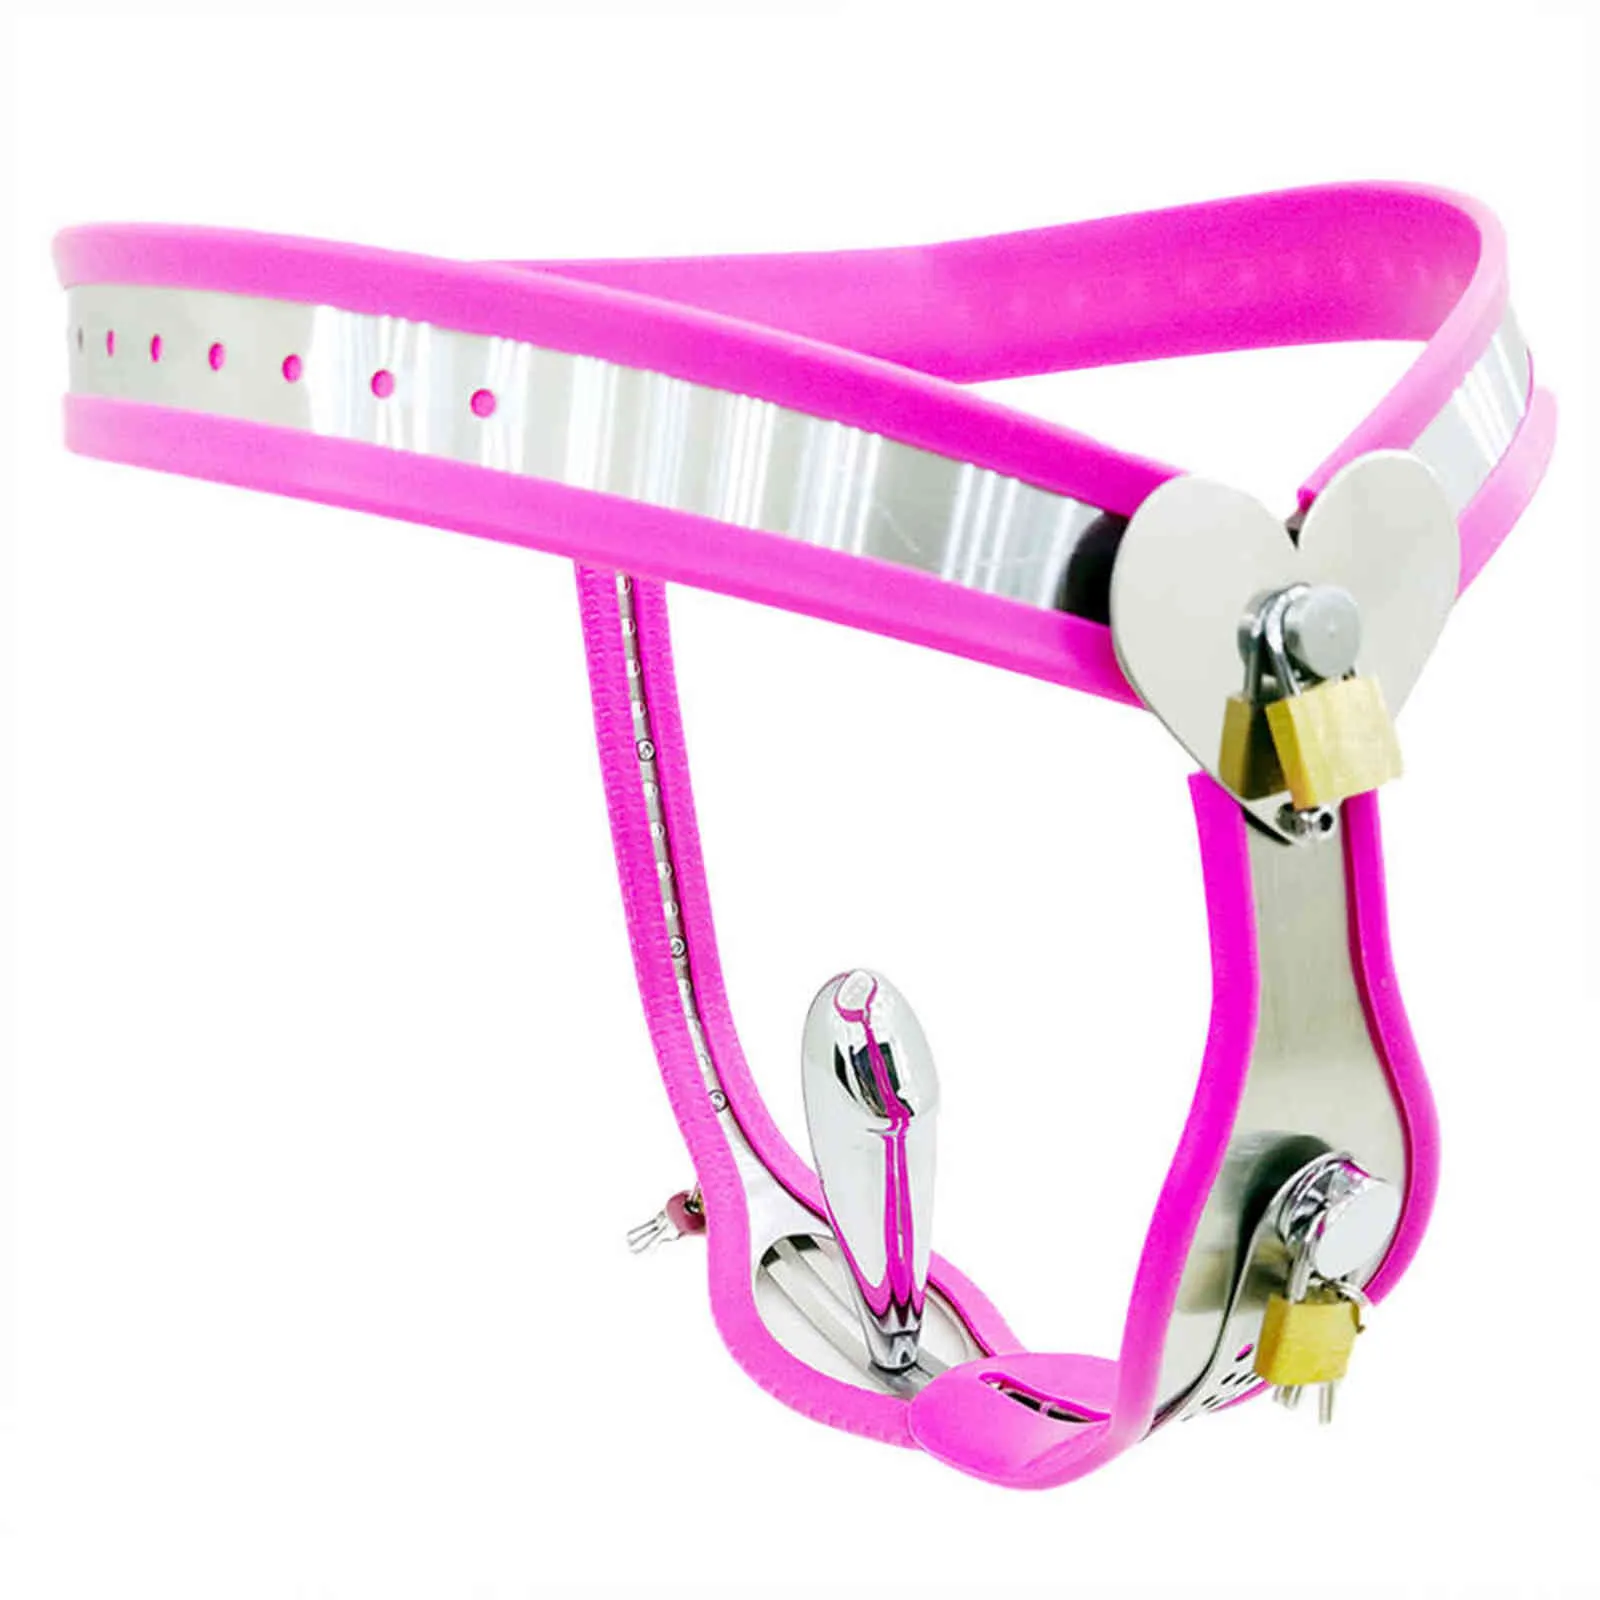 NXY Cockrings Fully Adjustable Female Chastity Belt Metal Underwear Stainless Steel Device BDSM Bondage Restraint Sex Toys For Woman 1124